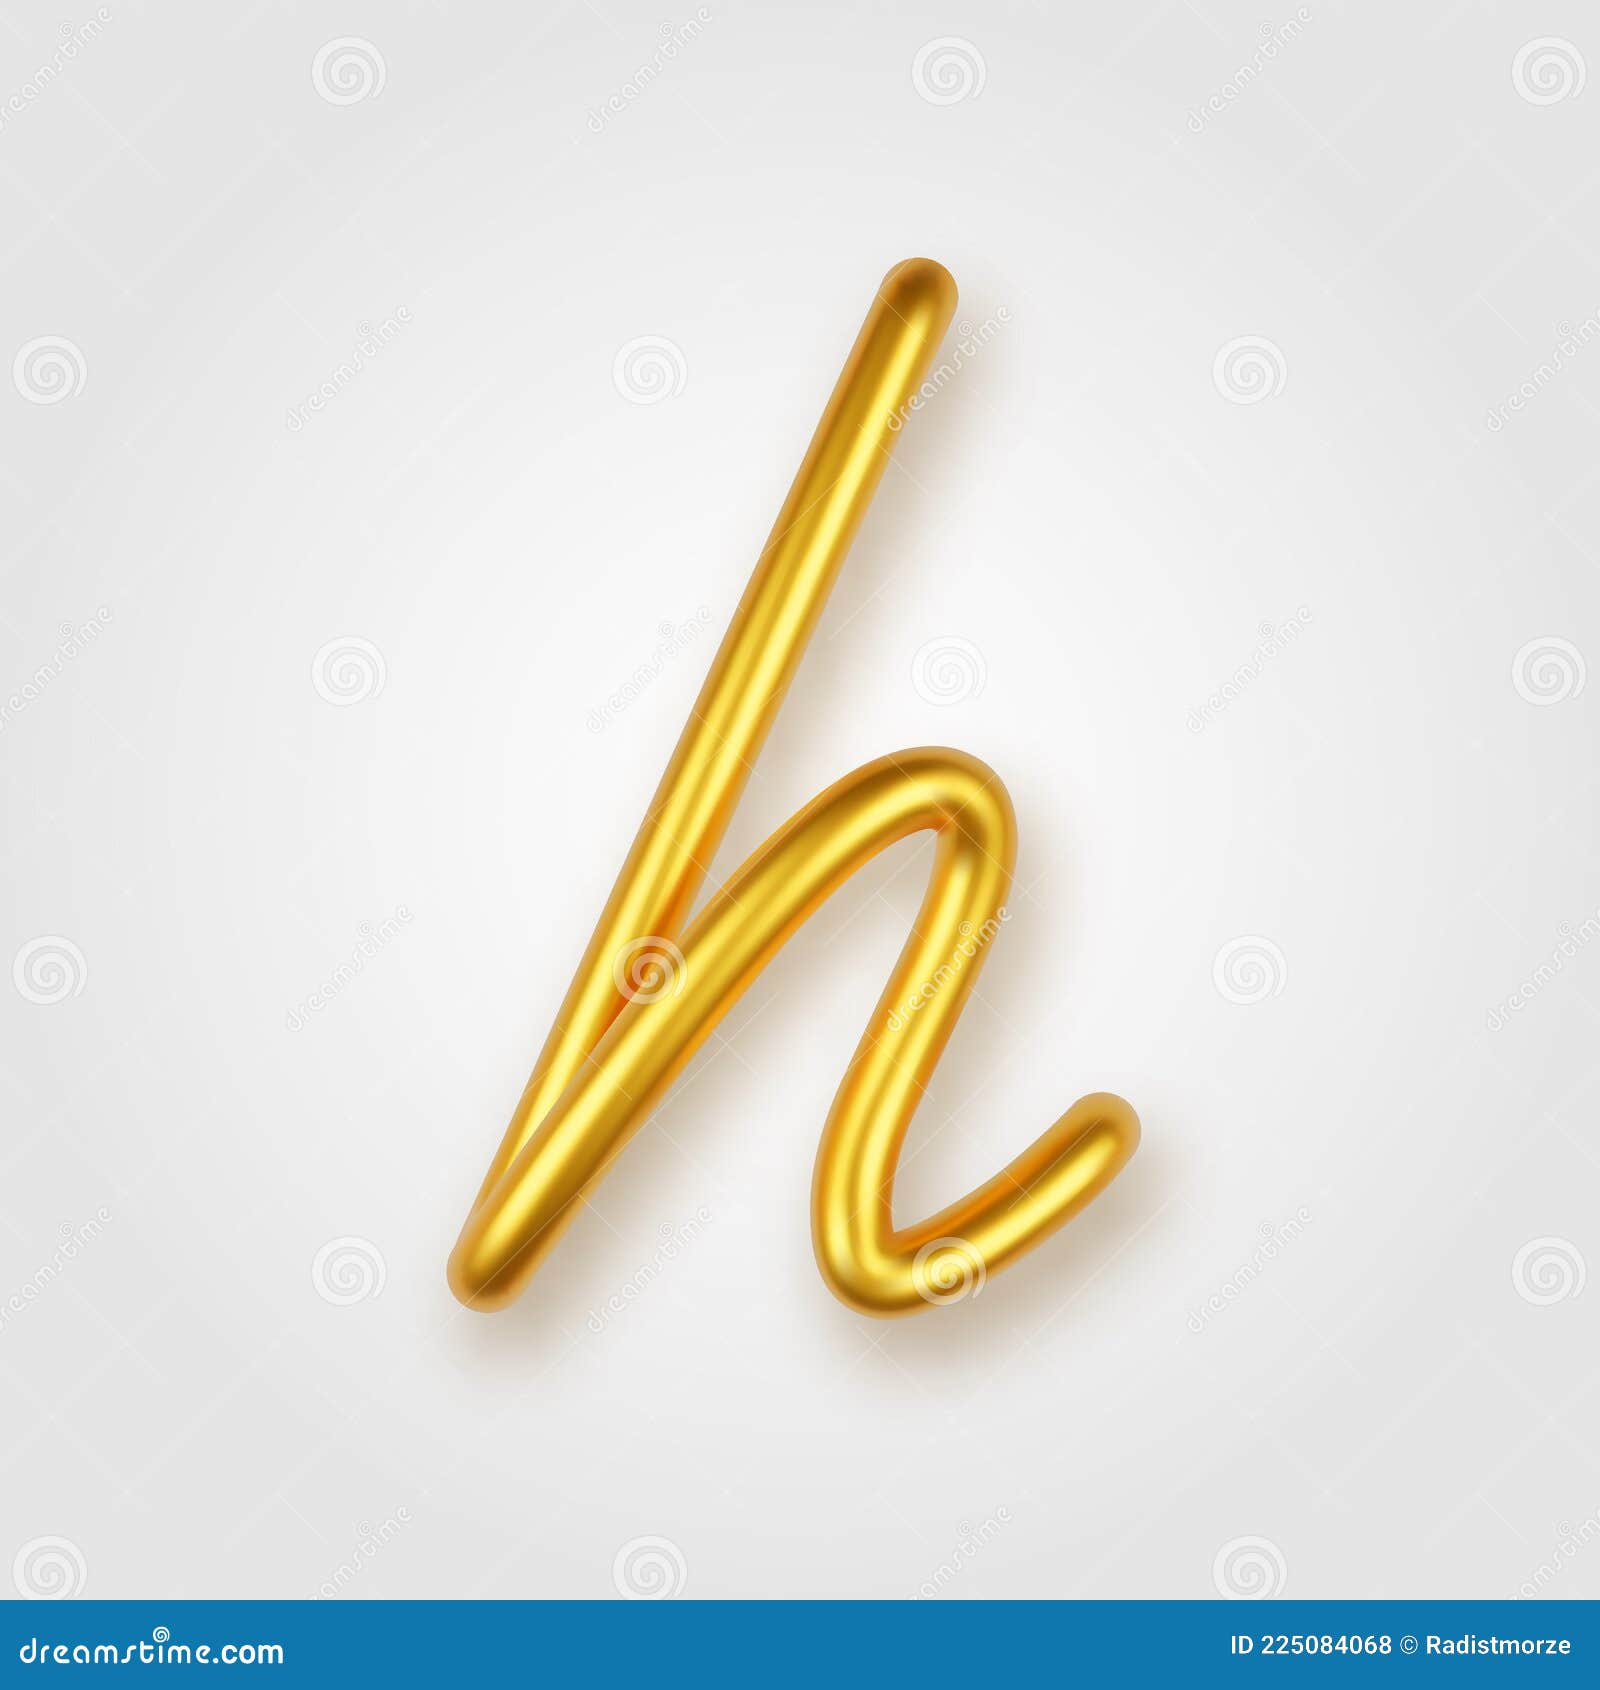 Gold 3d Realistic Lowercase Letter H on a Light Background. Stock ...